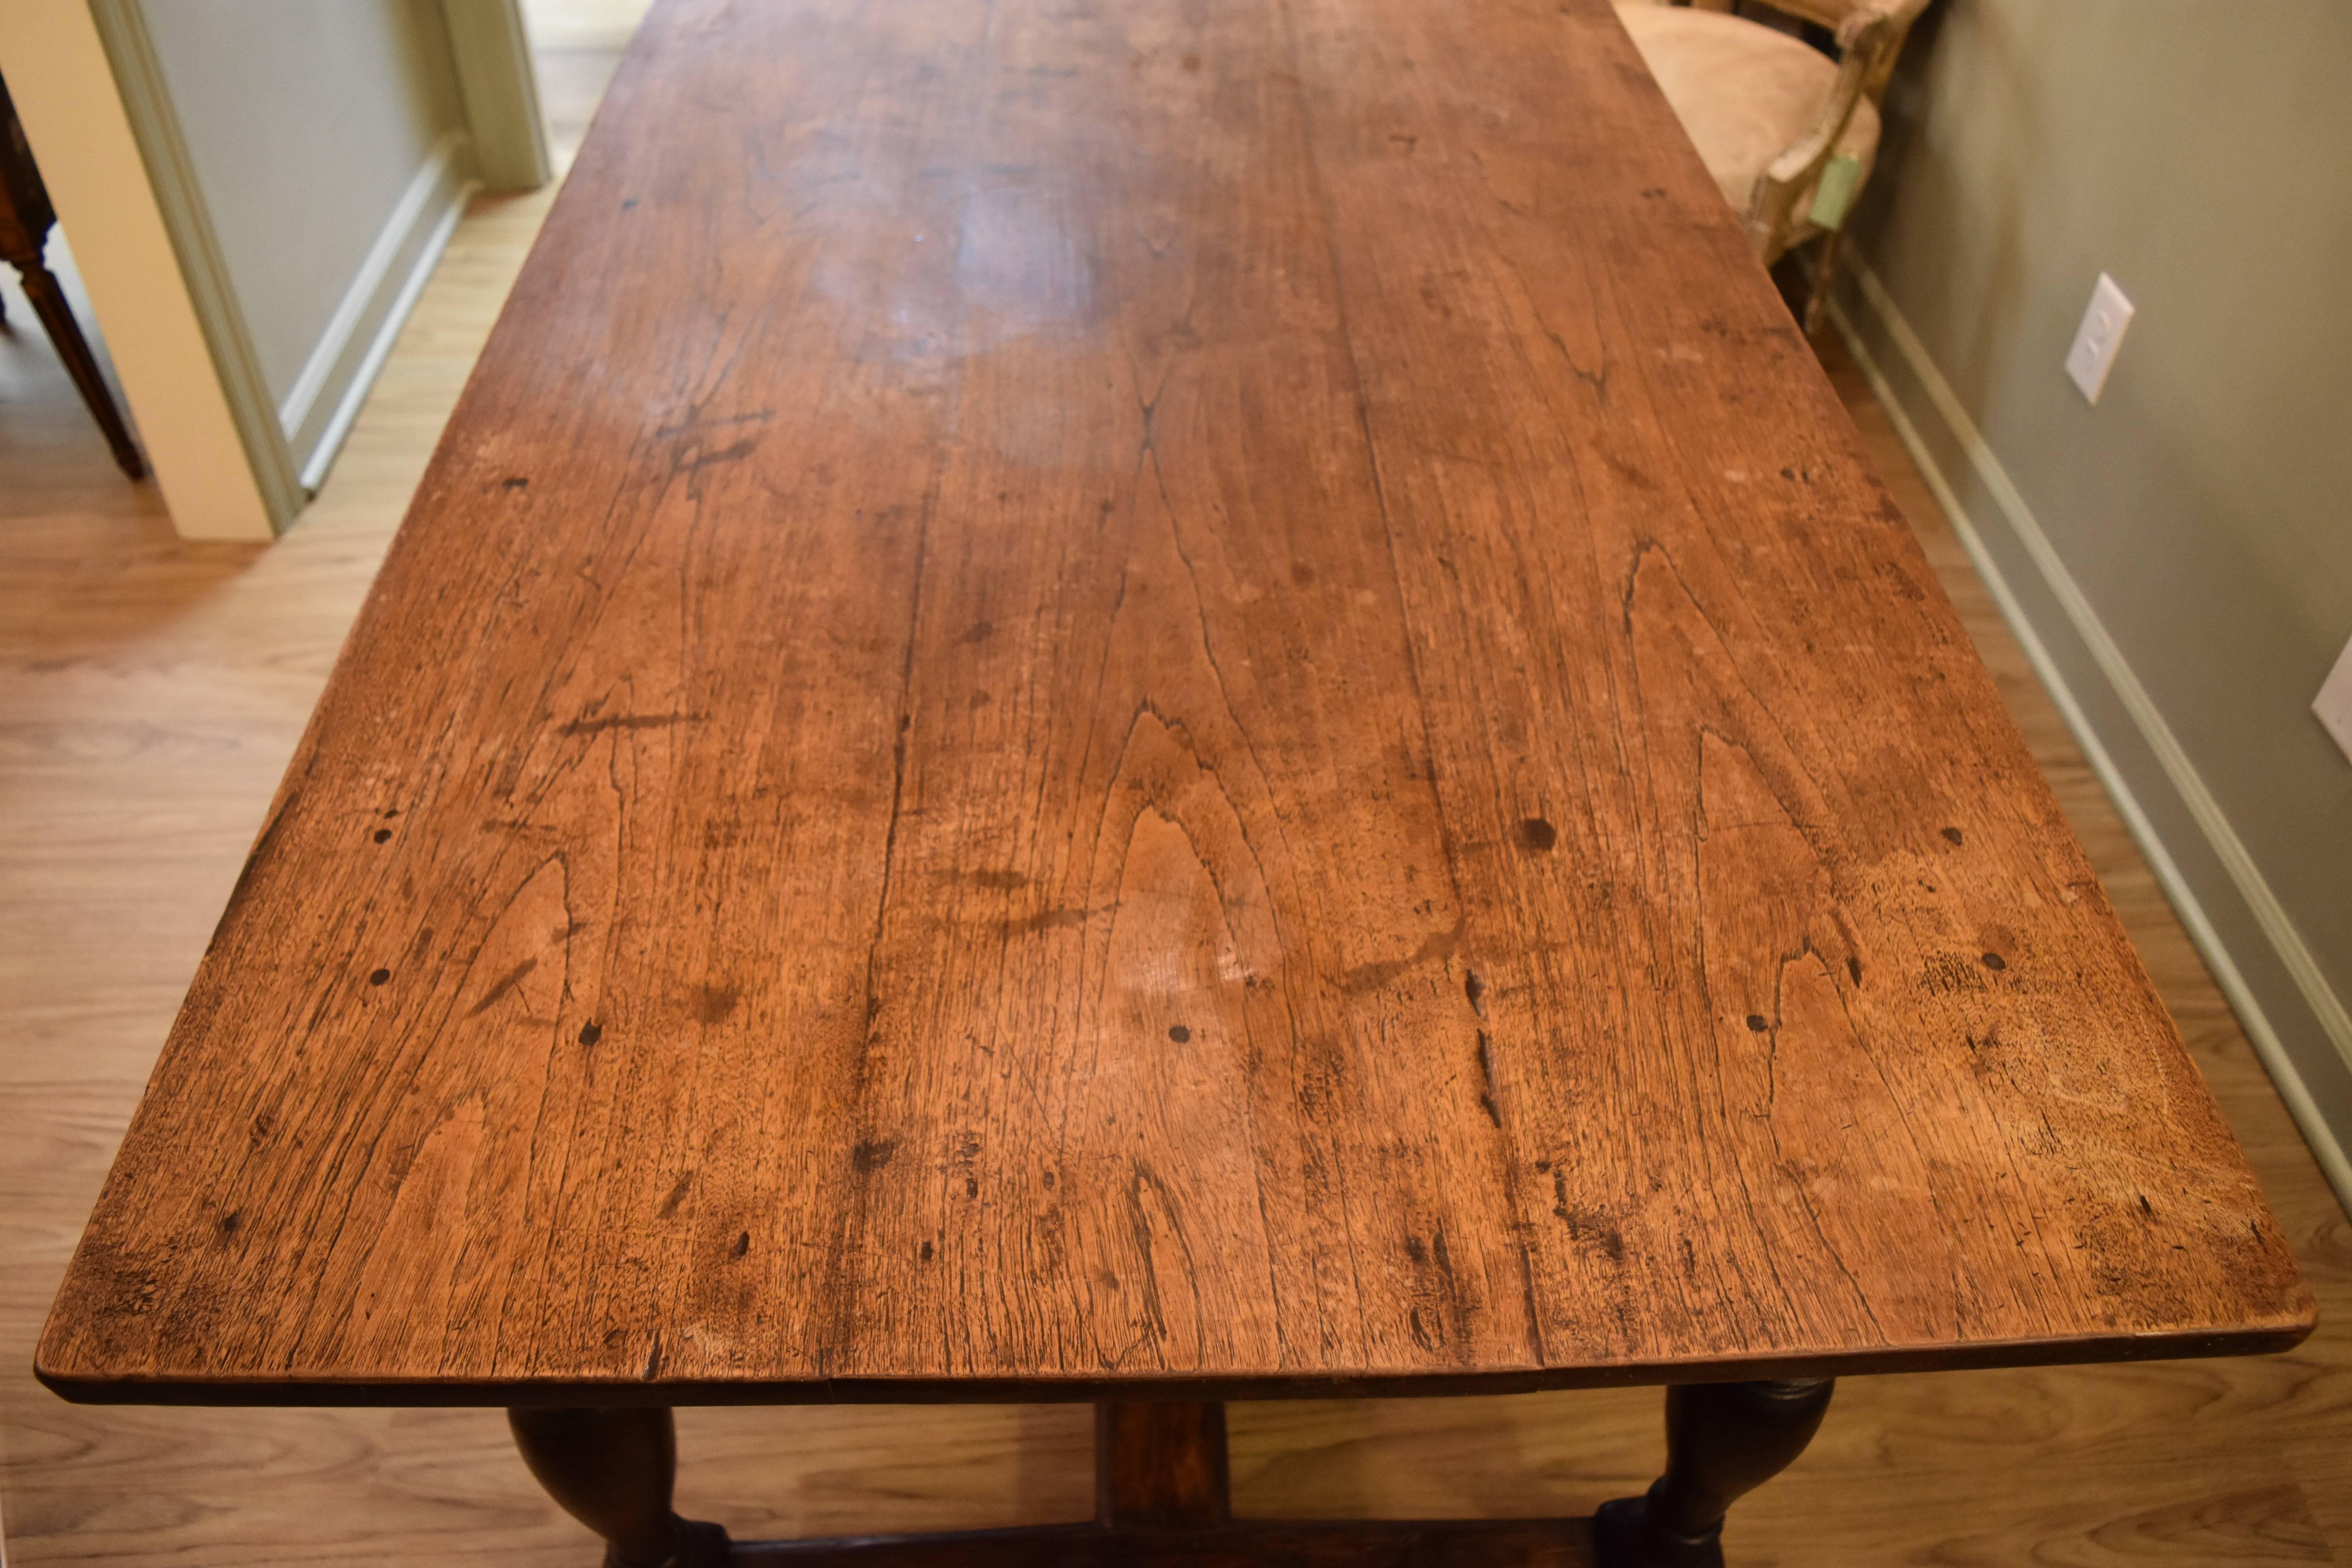 This 19th century French farm table is made of oak and walnut. It is in the trestle style and has a wonderful warm patina.